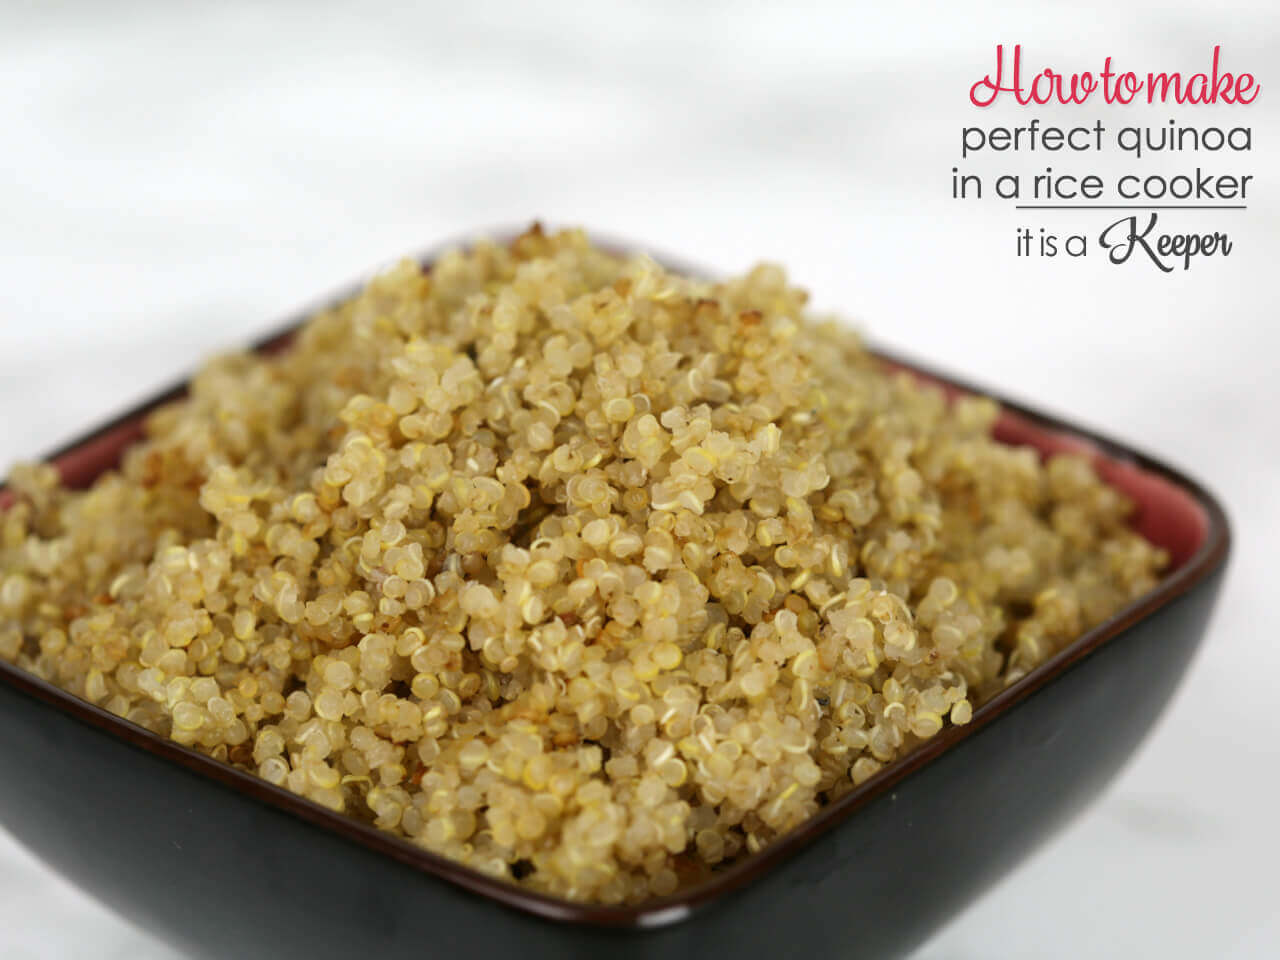 How to make perfect quinoa in a rice cooker